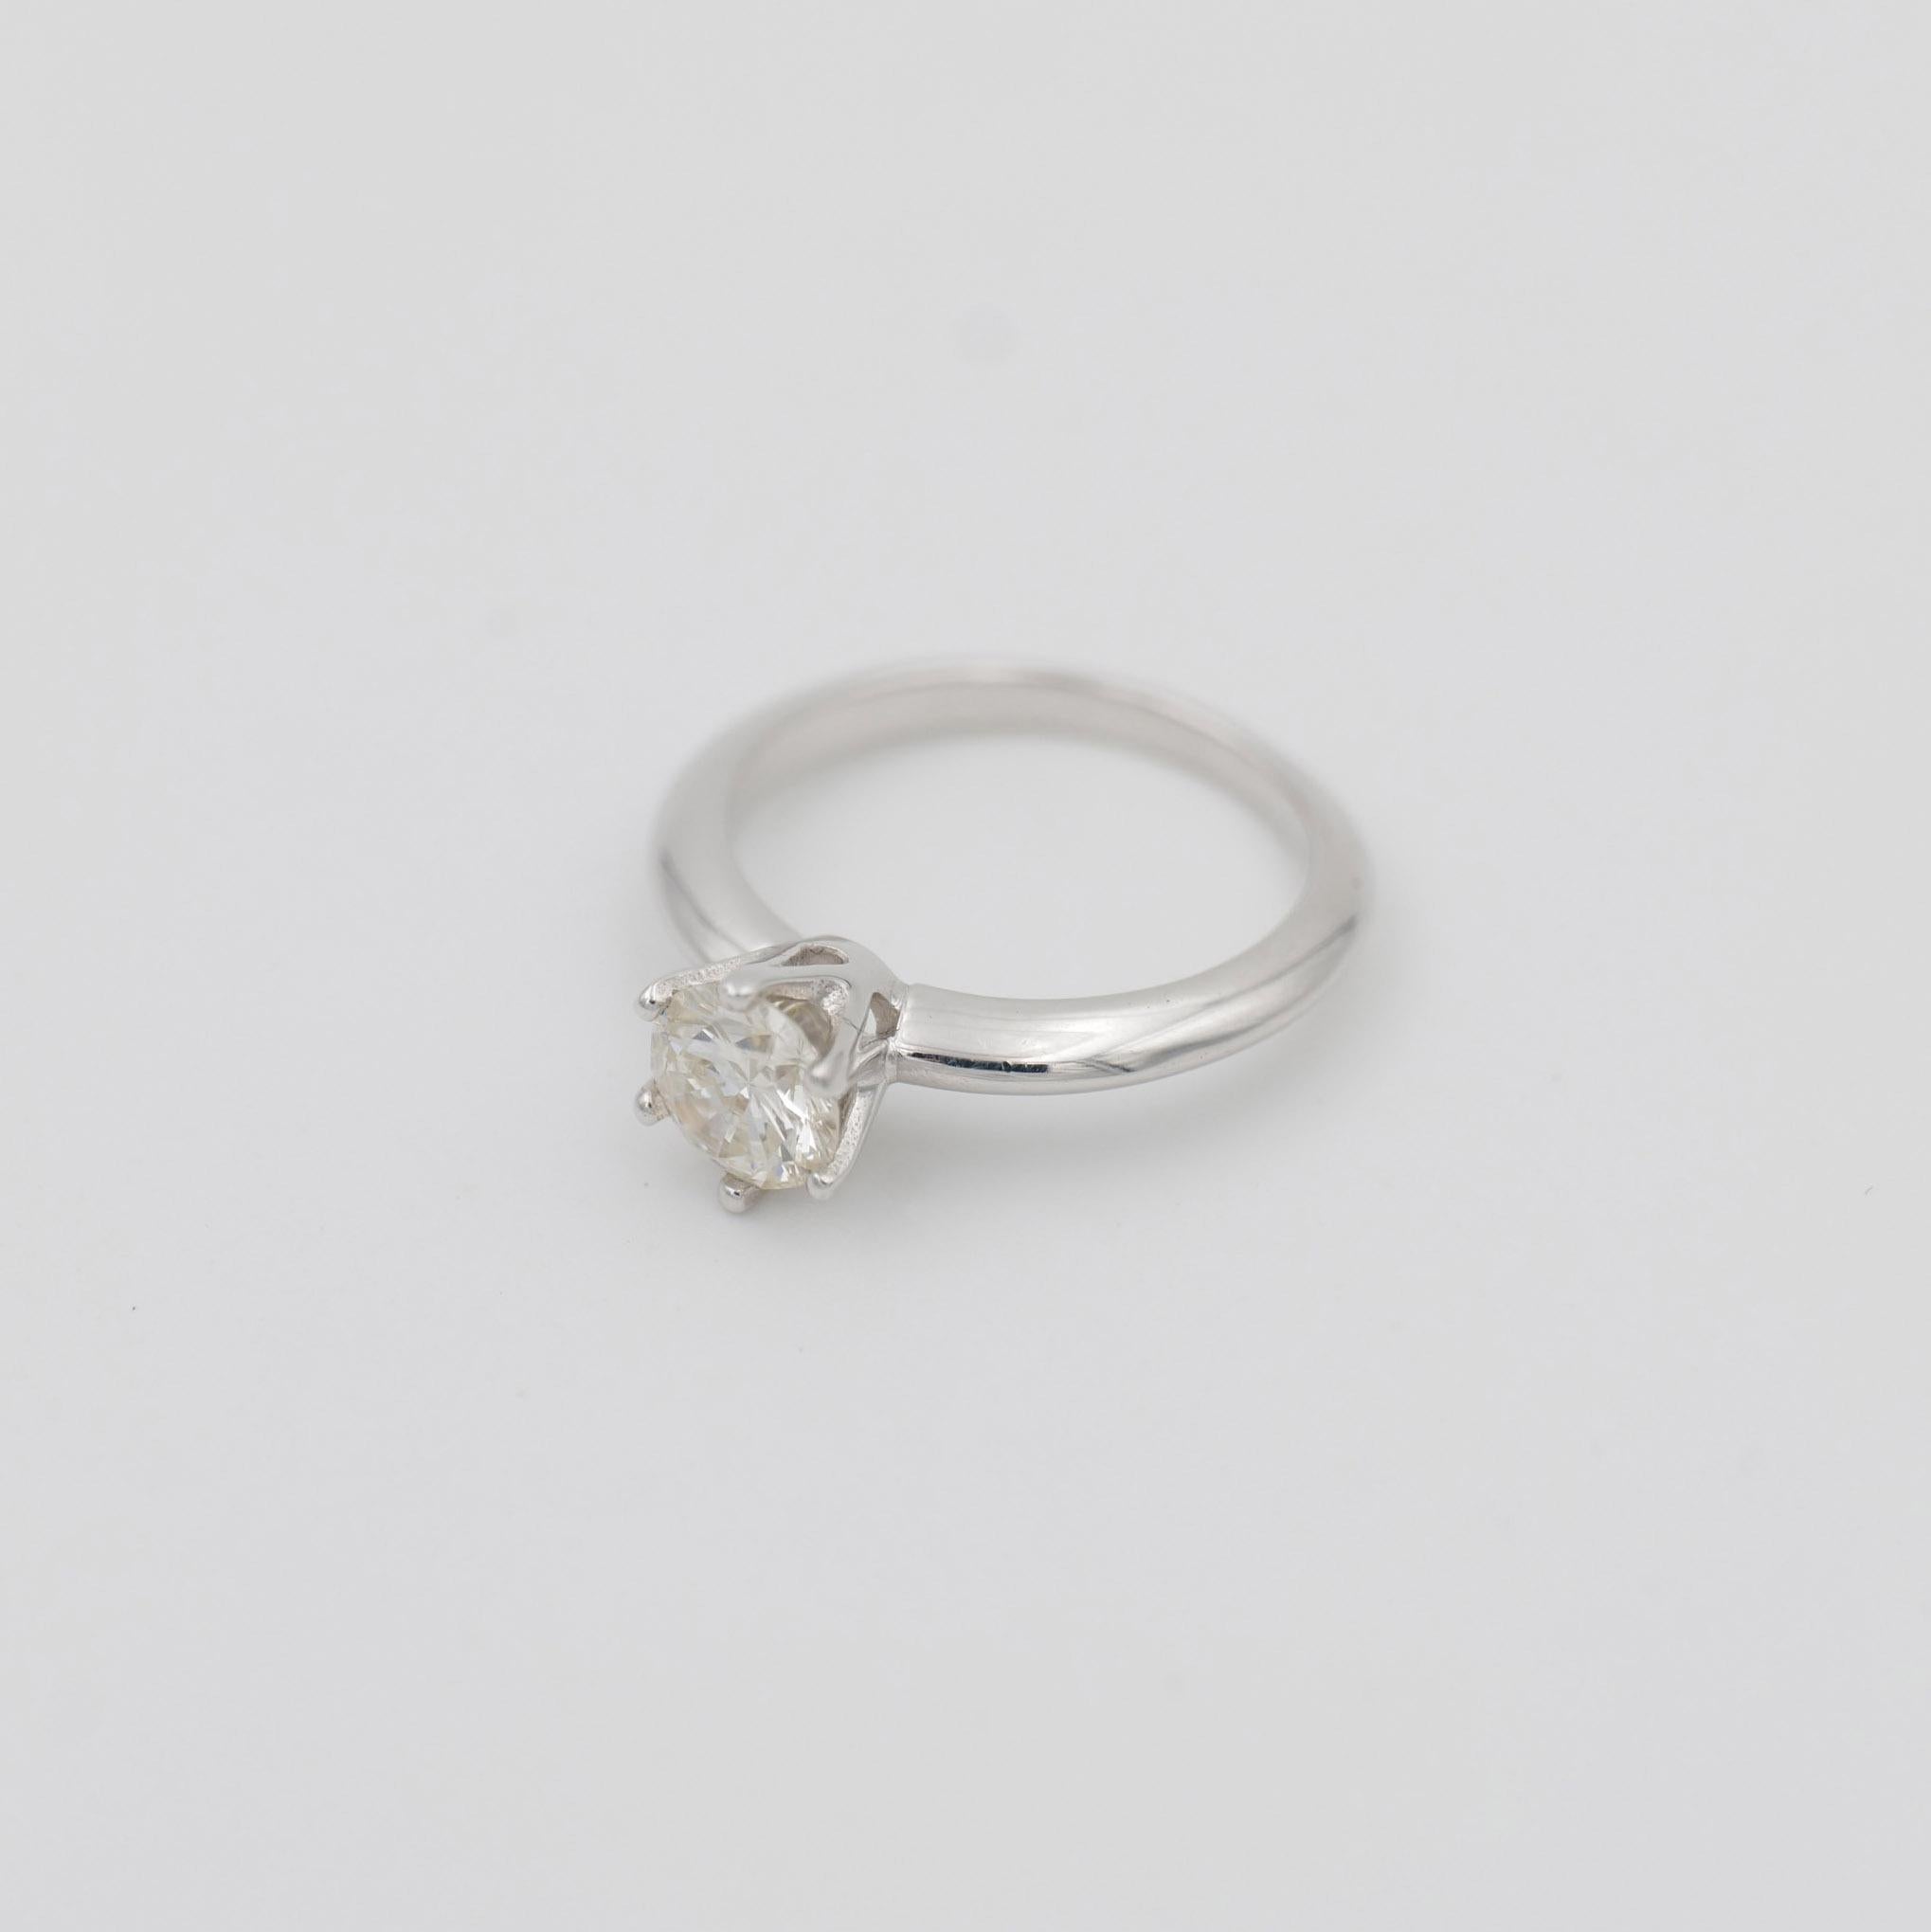  
 

Ring with brilliant-cut solitaire diamond, 1 carat, top Wesselton, VSI, set in 750/- gold, claw setting, ring size 53
 The classic engagement ring with a high-quality stone and classic brilliant cut.

A simple and timeless goldsmith's work that